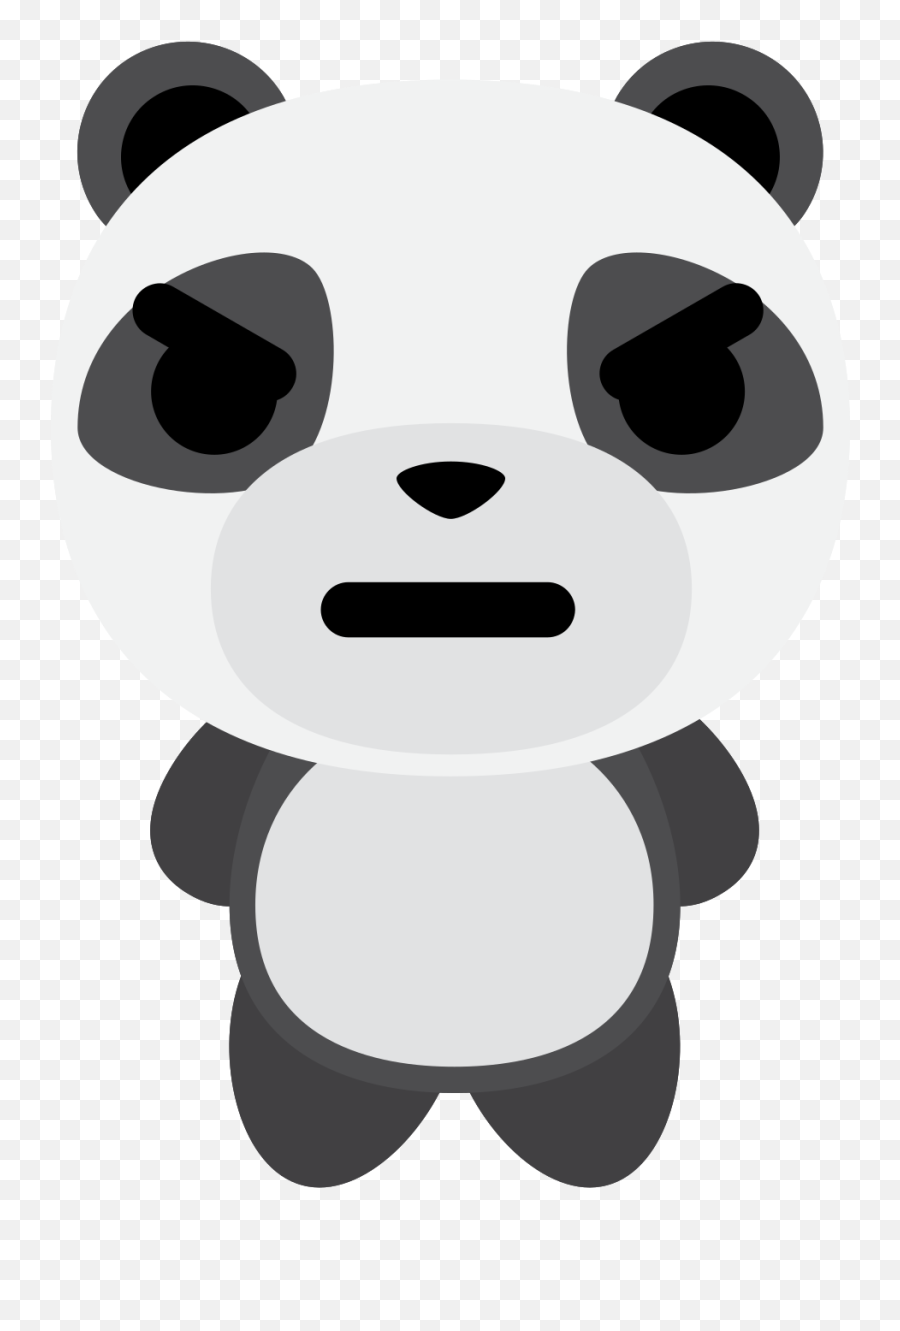 Free Emoji Panda Angry Png With Transparent Background - Gif,Angry Laughing Crying Emoji